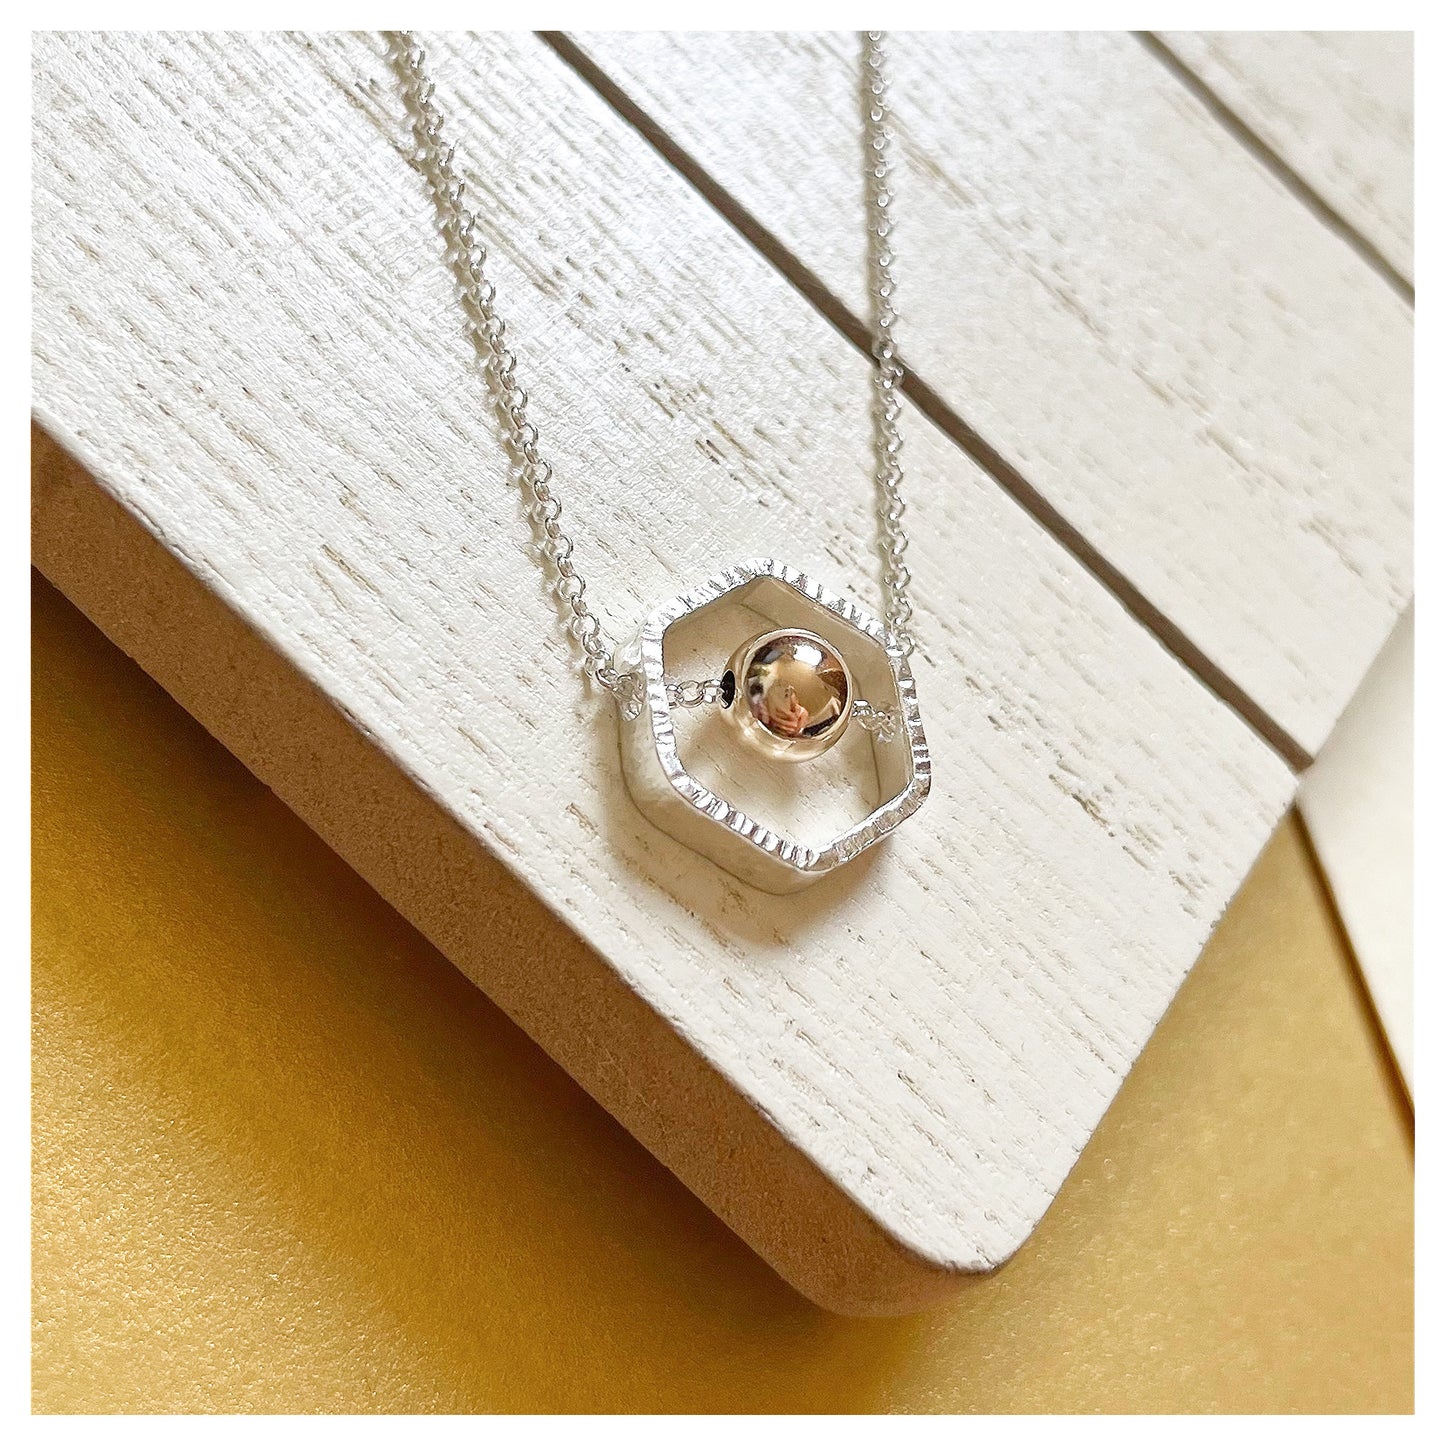 9ct Yellow Gold and Sterling Silver Hexagon Necklace with Bead.